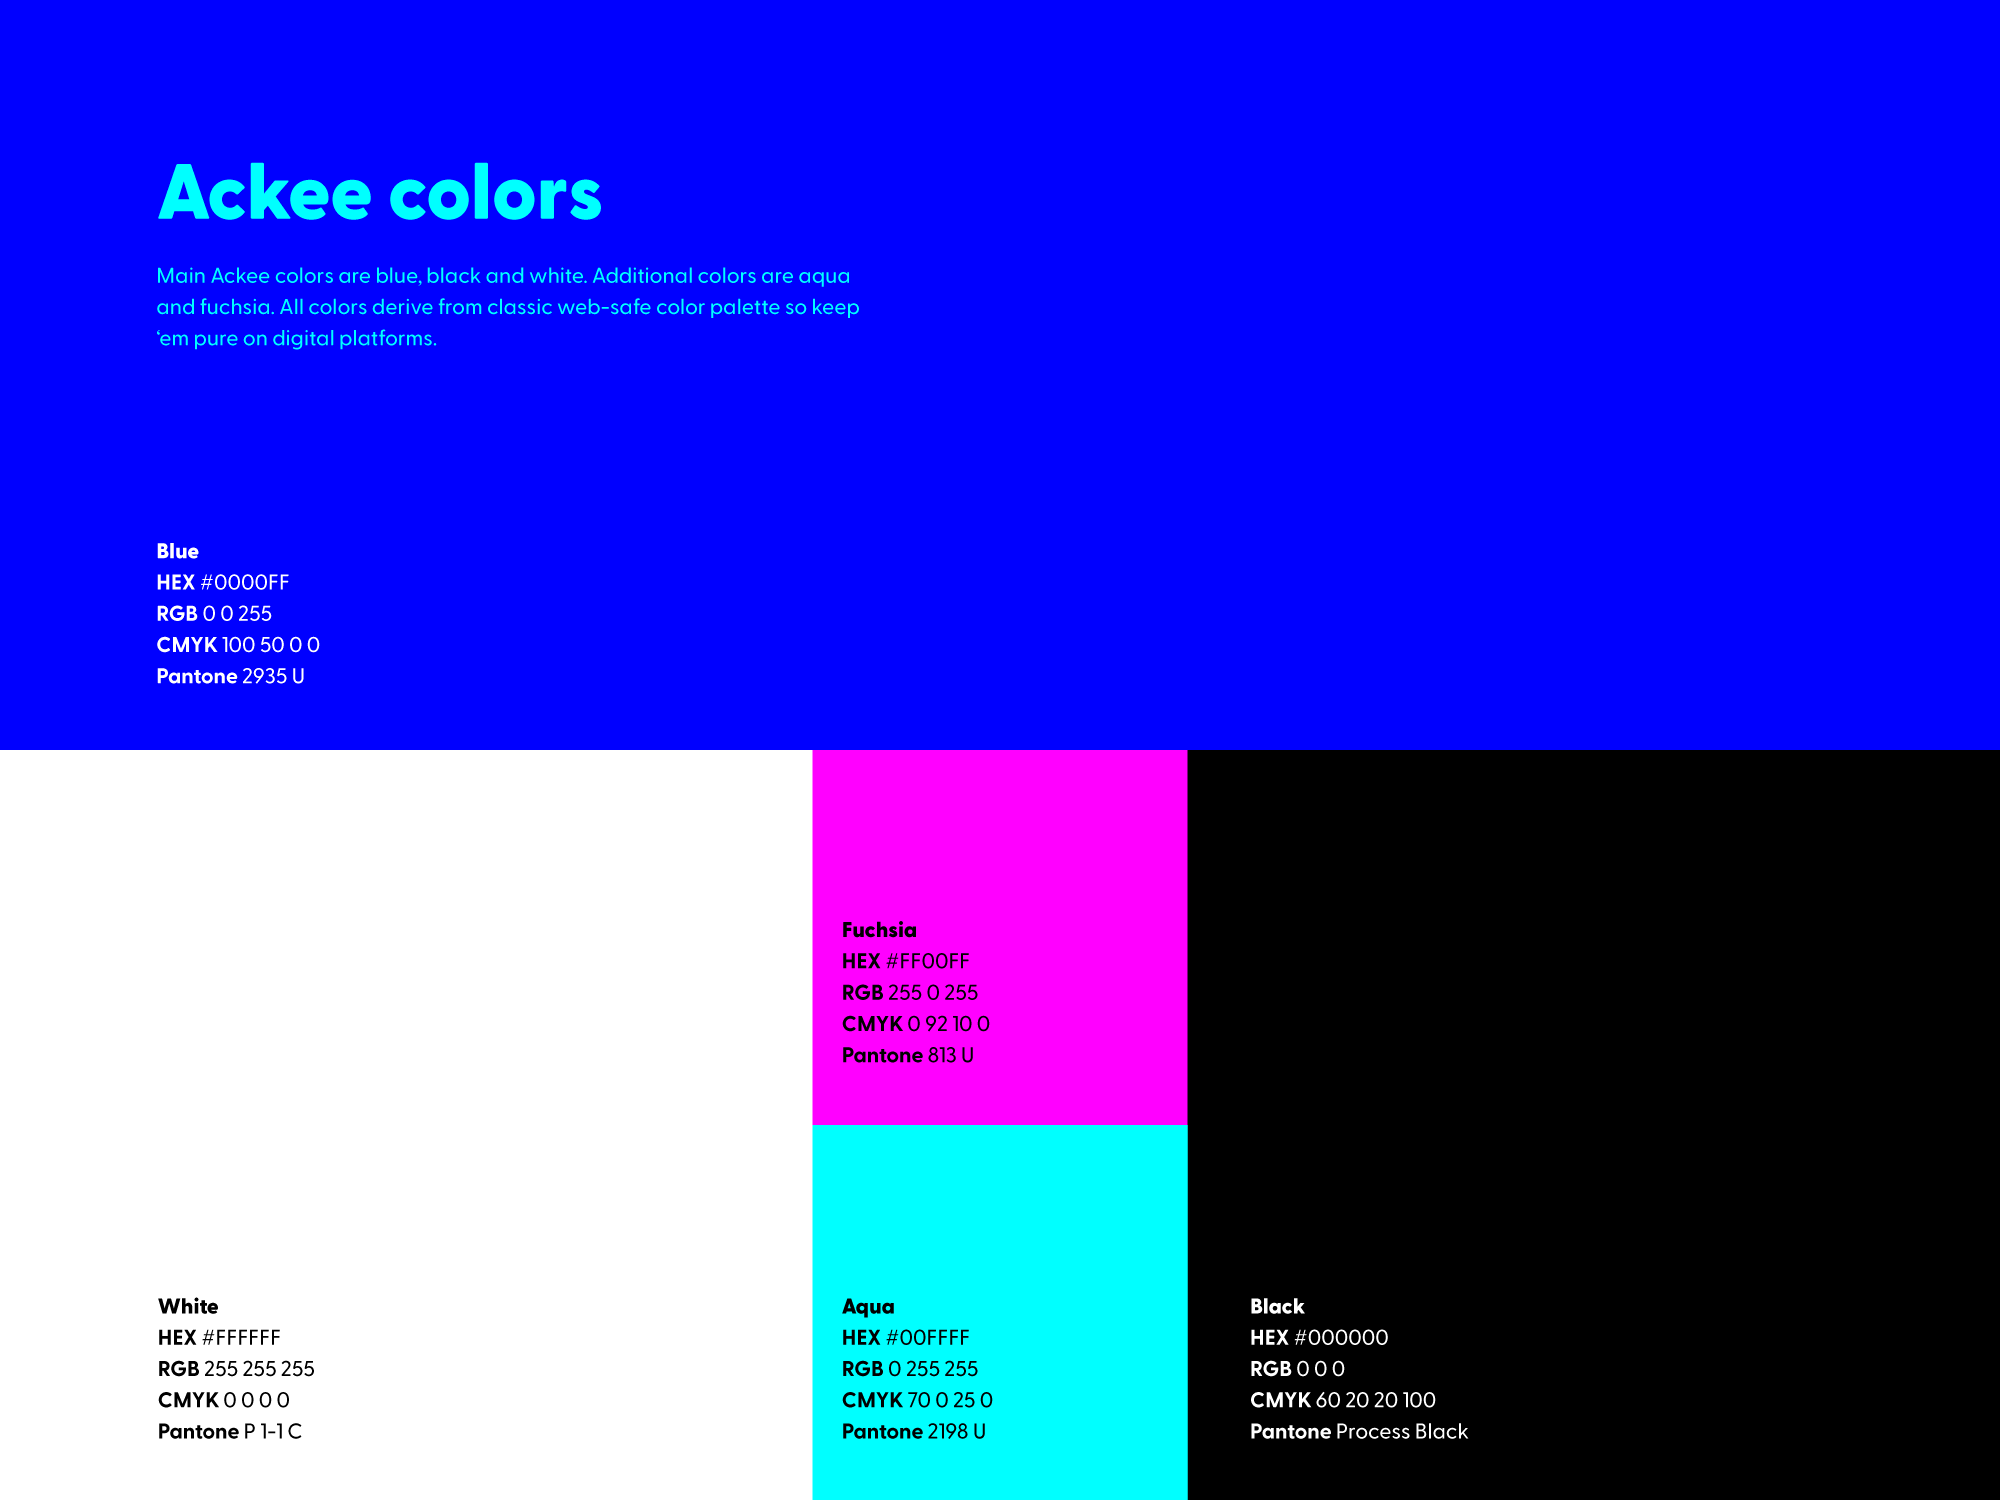 Ackee colors